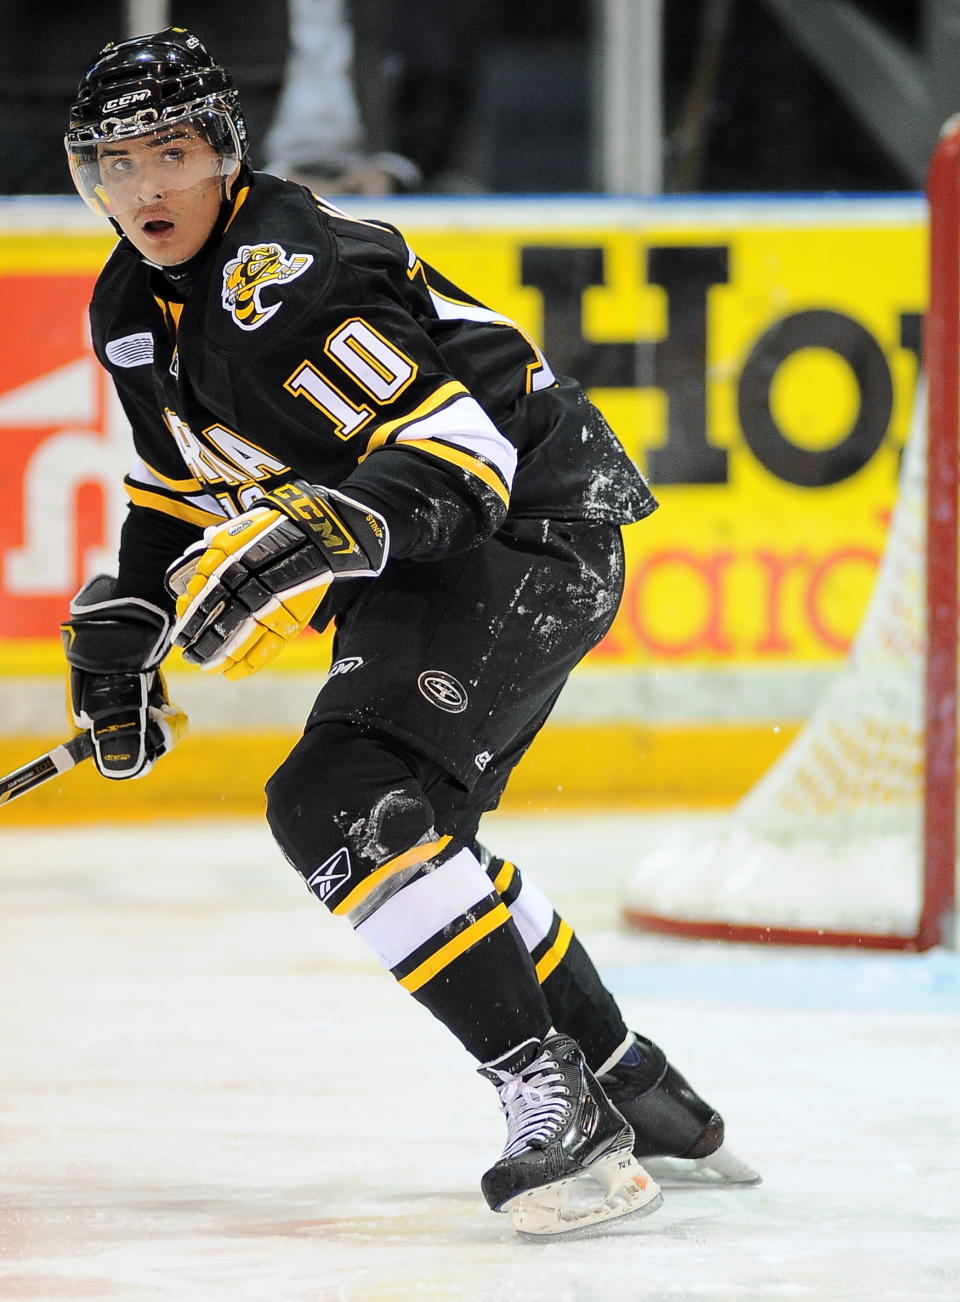 Nail Yakupov of the Sarnia Sting. Photo by Aaron Bell/CHL Images.